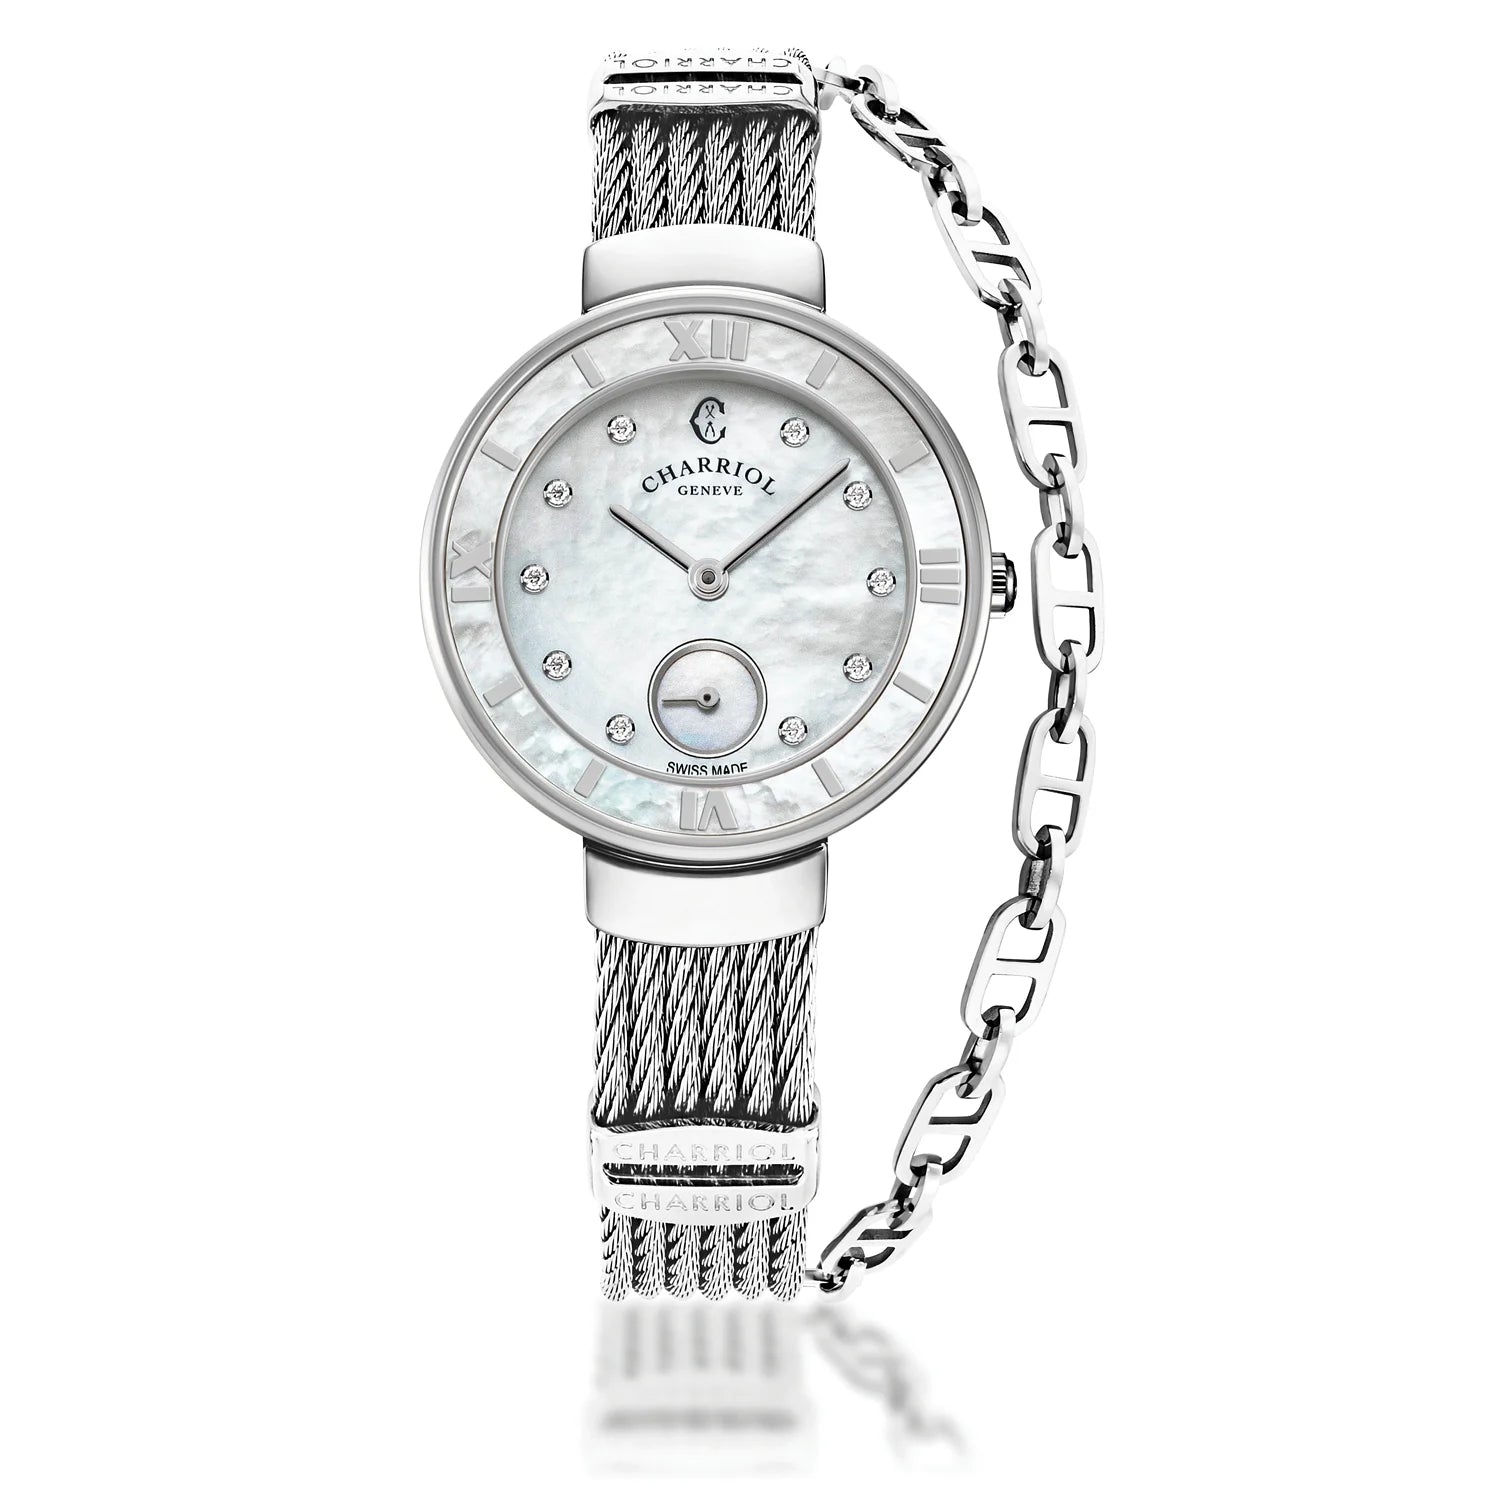 ST TROPEZ, 30MM, QUARTZ CALIBRE, MOTHER-OF-PEARL WITH 10 DIAMONDS, MOTHER-OF-PEARL BEZEL, STEEL CABLE BRACELET - Charriol Geneve -  Watch